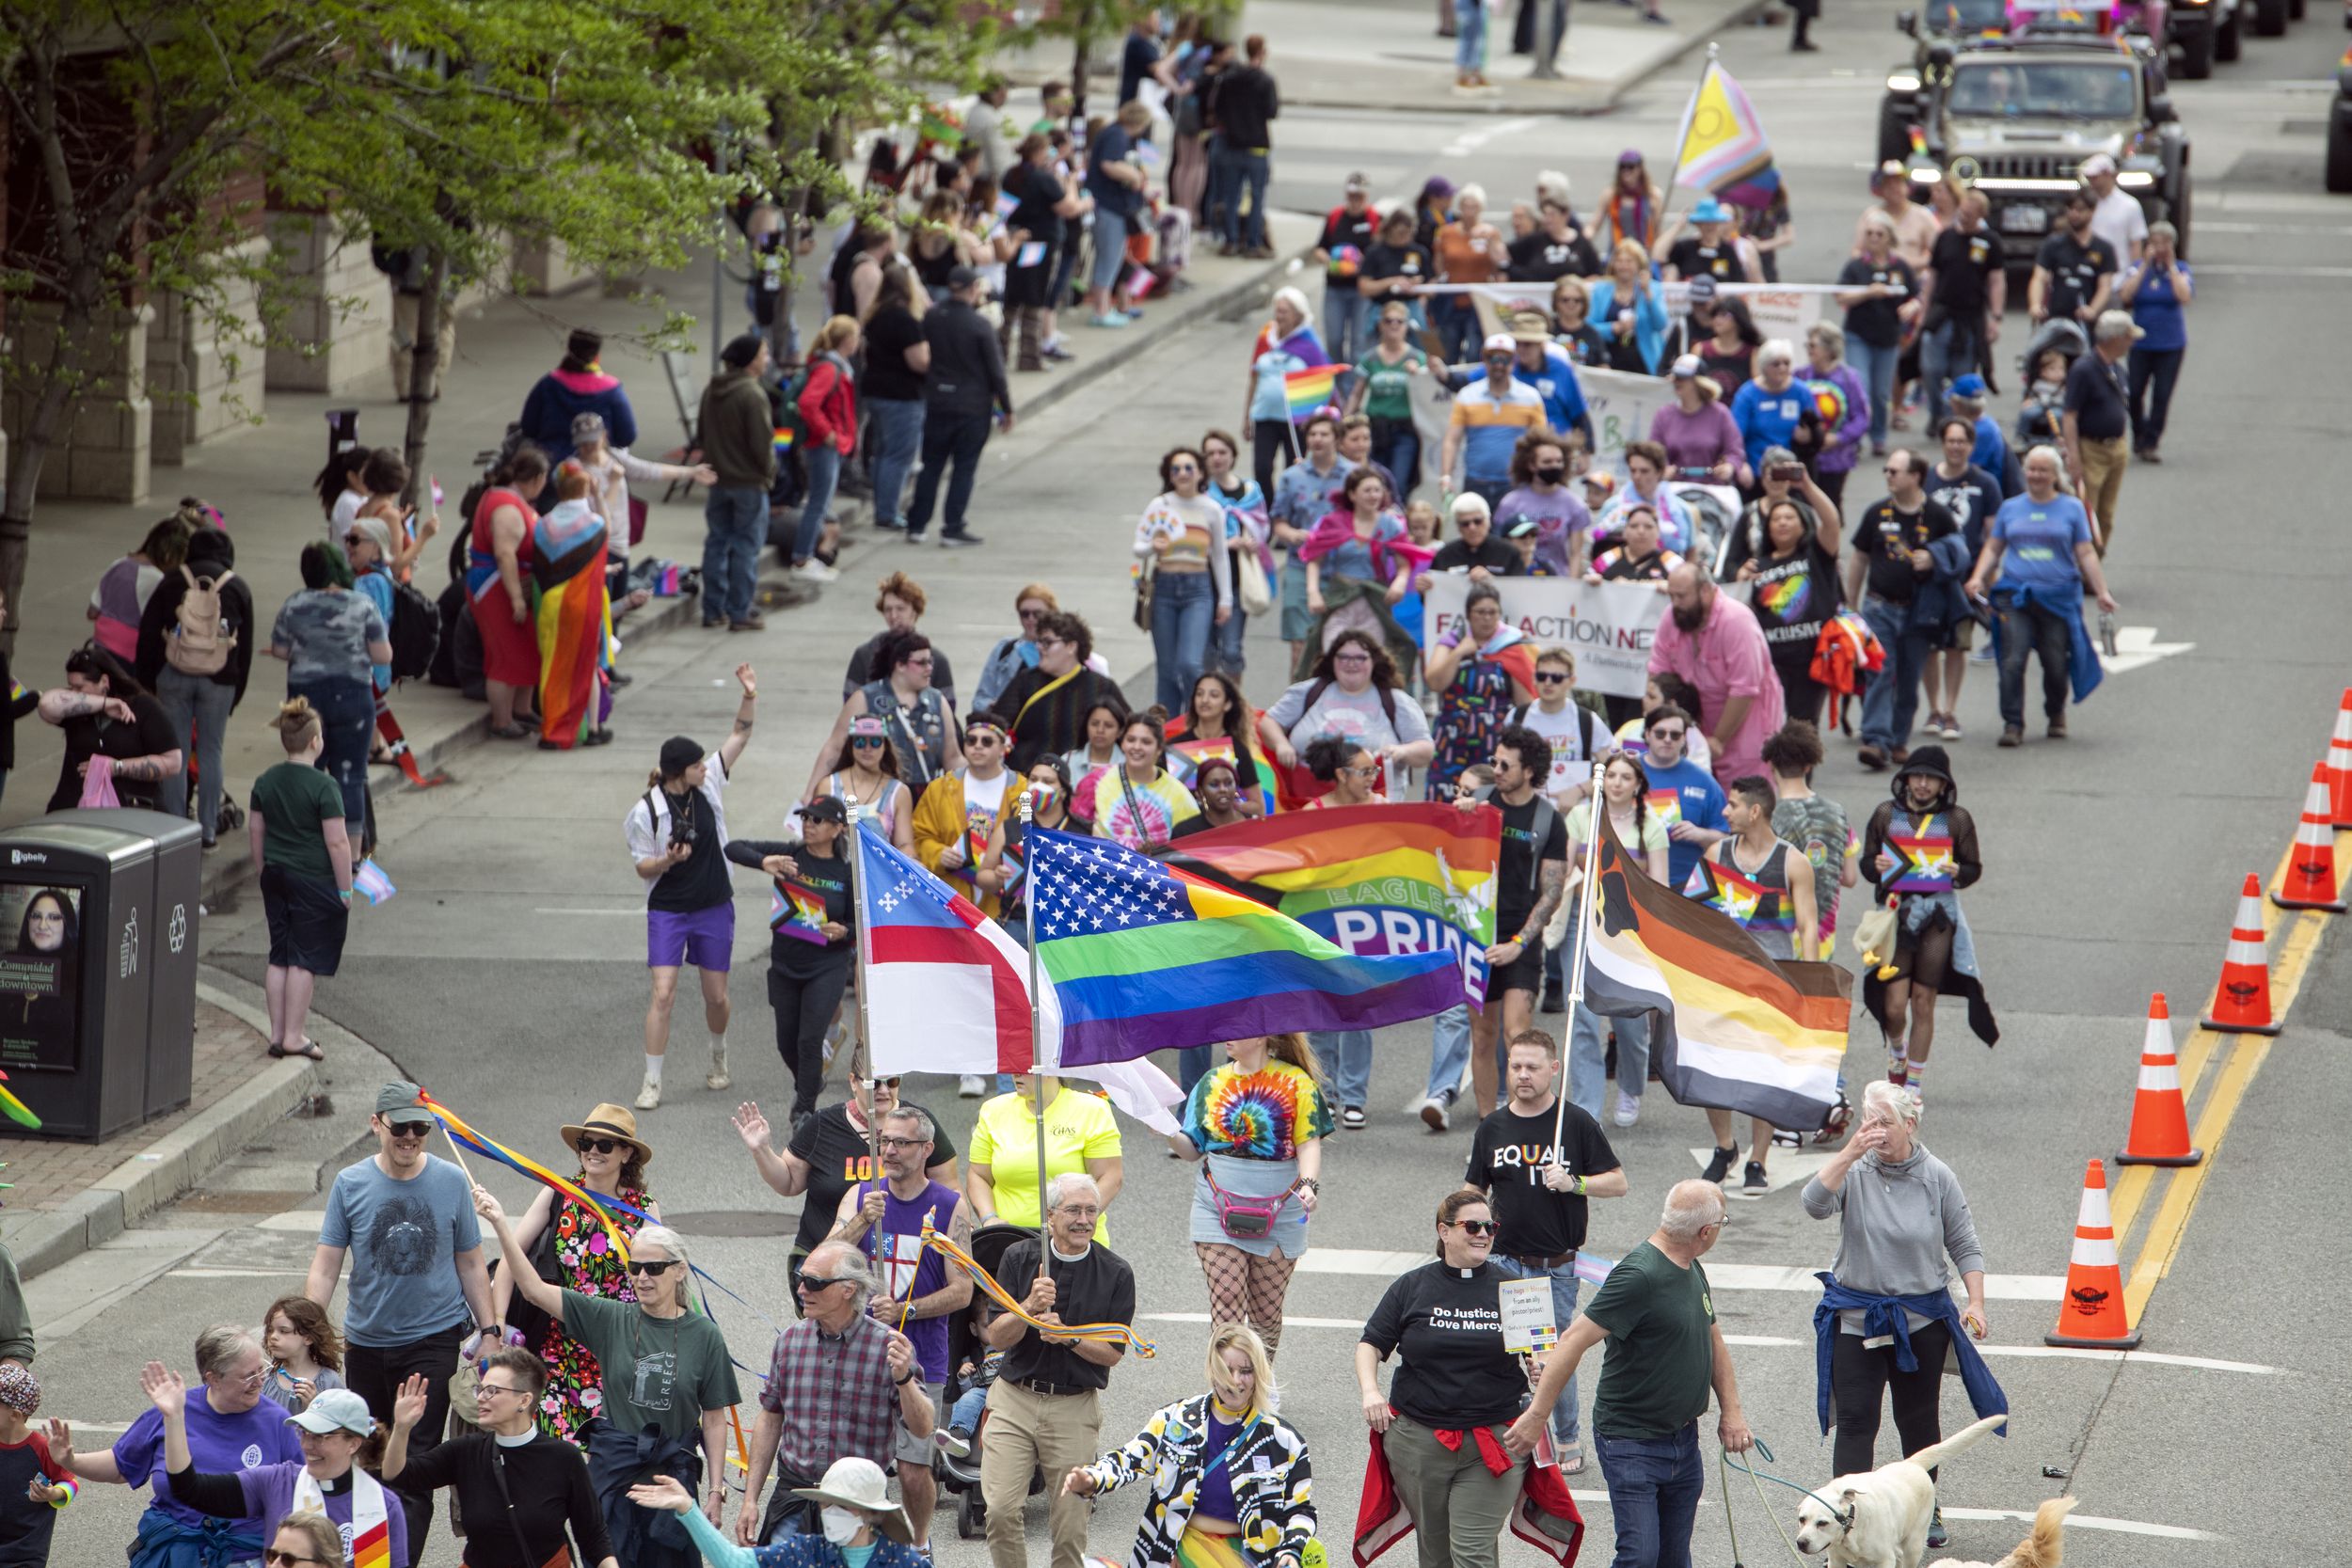 Rainbows without the rain Spokane Pride returns to the streets in 2022